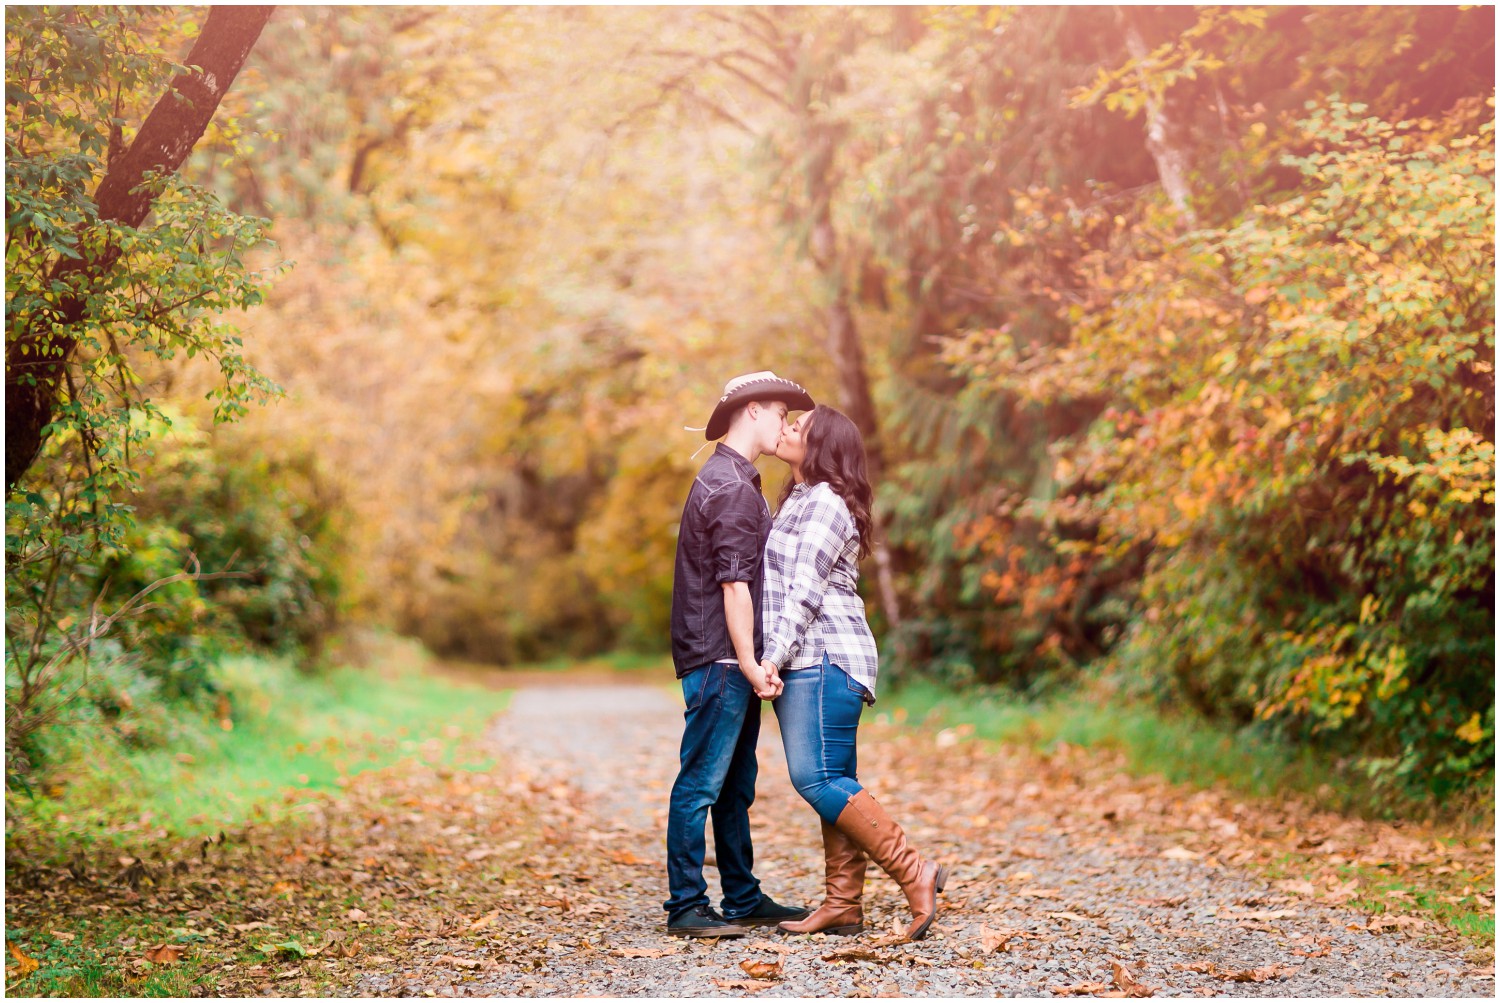 A Colorful Fall Engagement Session at Tolt MacDonald Park